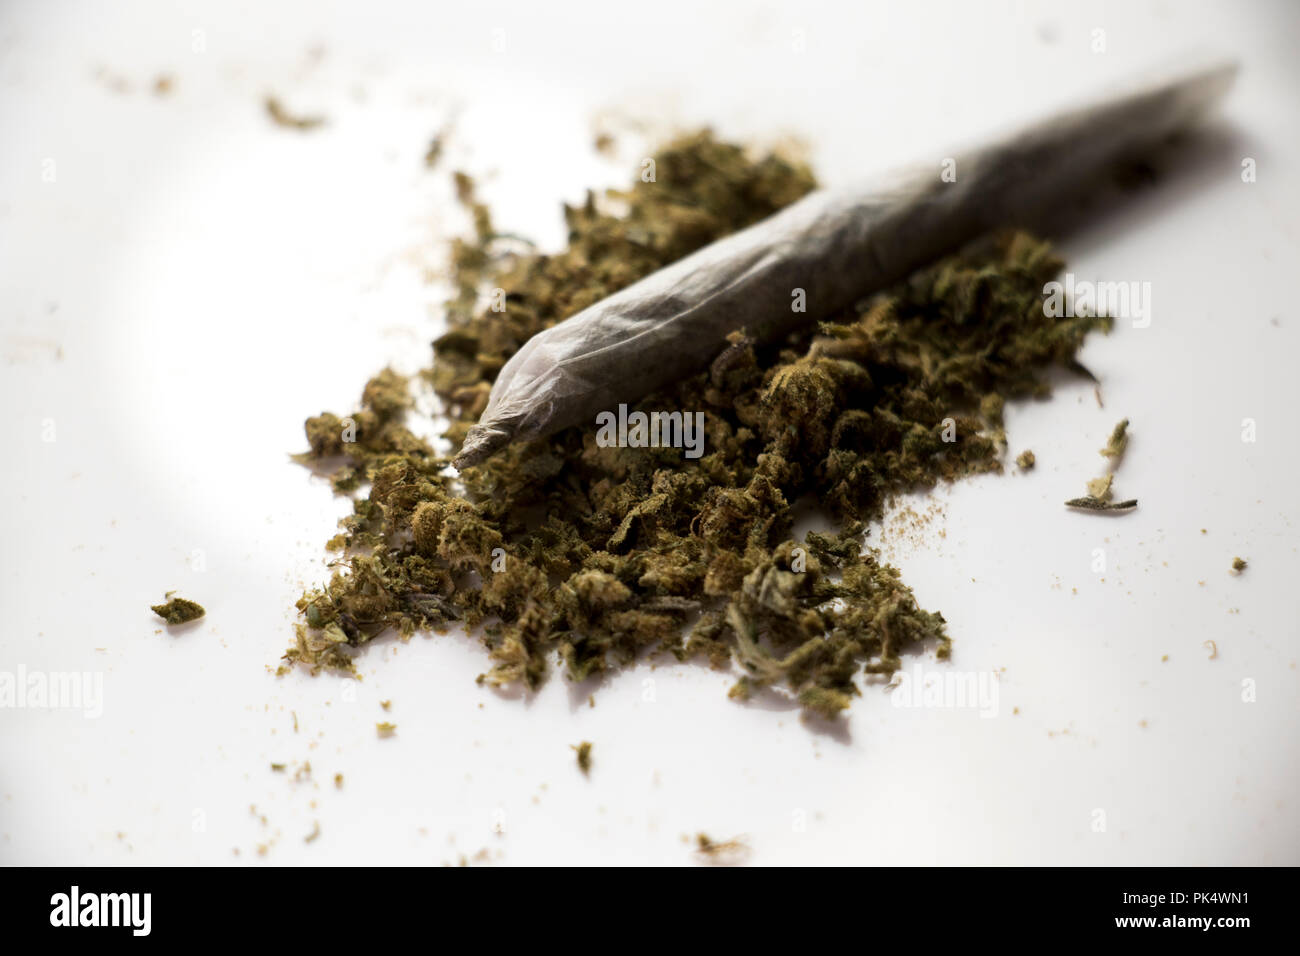 Rolled Joint on a table with weed. Natural remedies prescription medical marijuana. Cannabis plant. Stock Photo